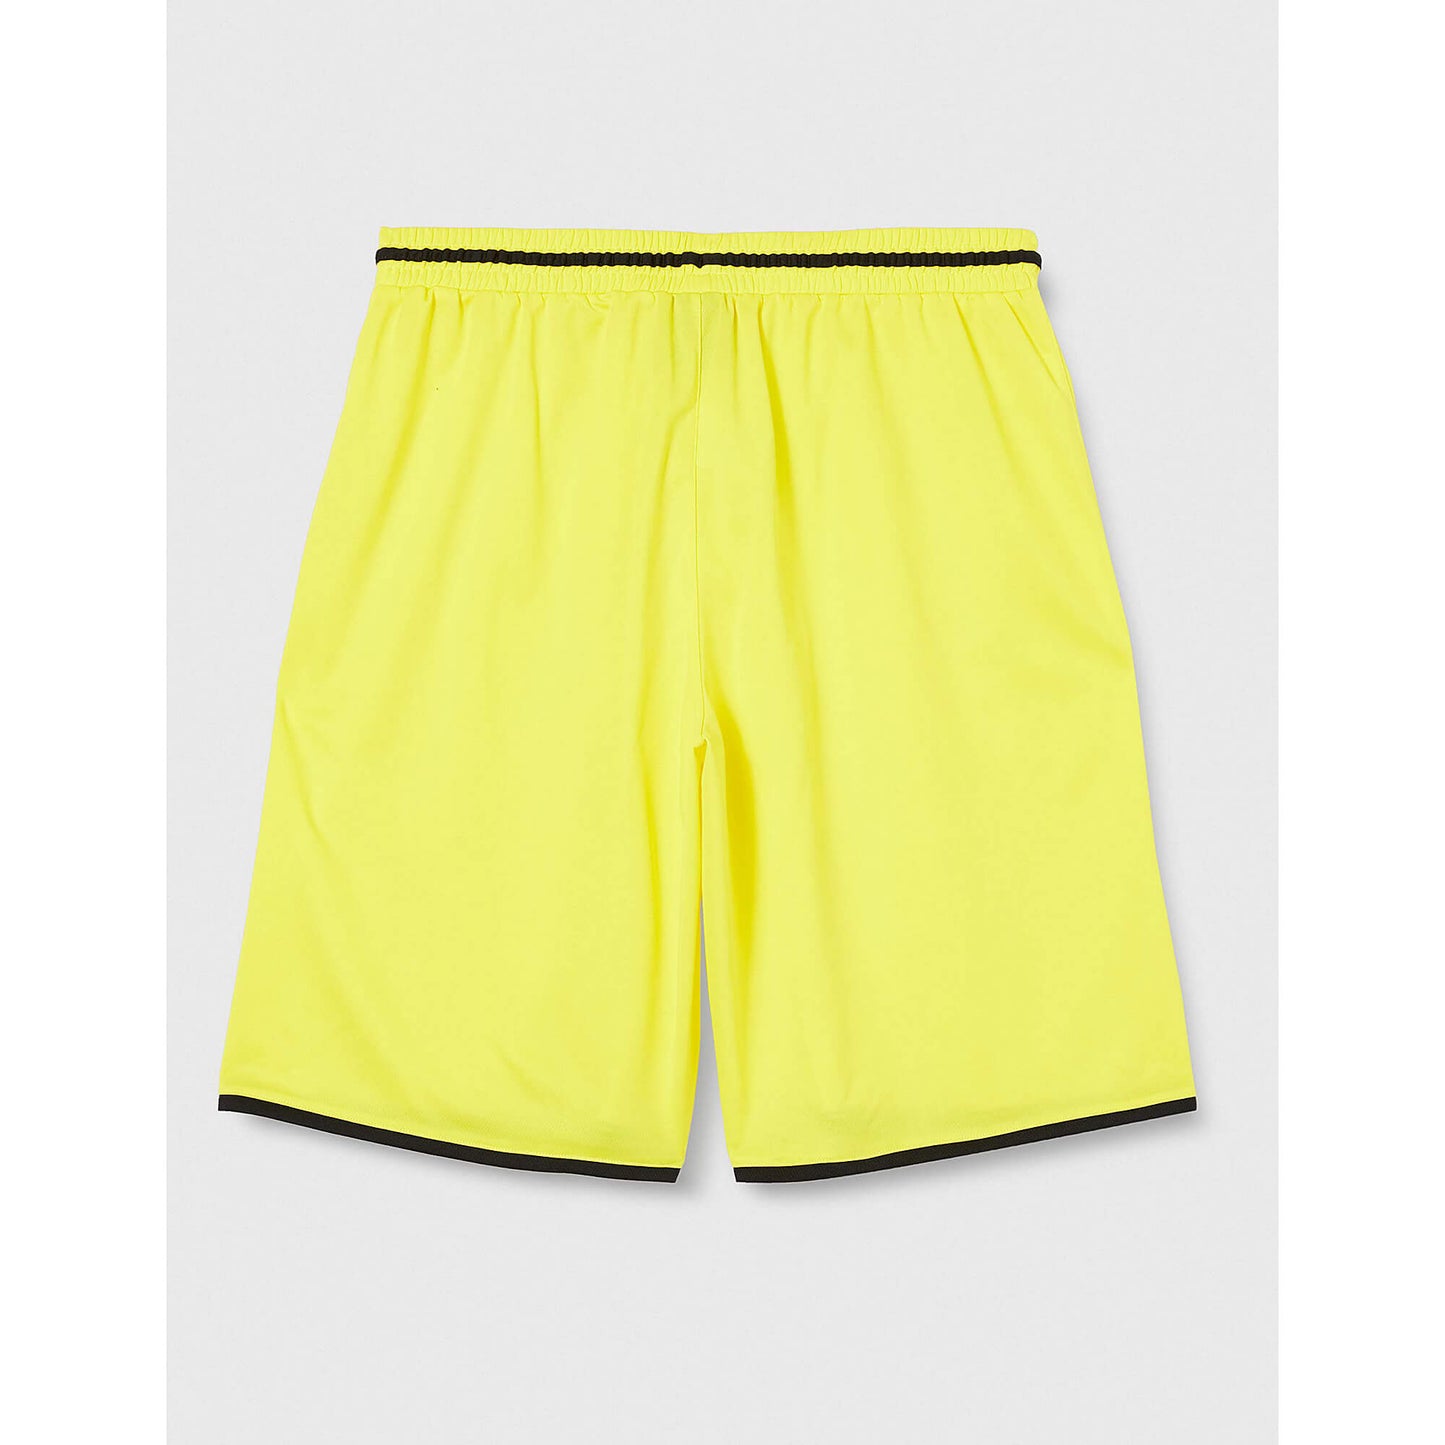 Spalding Move Short Lime Yellow/Black